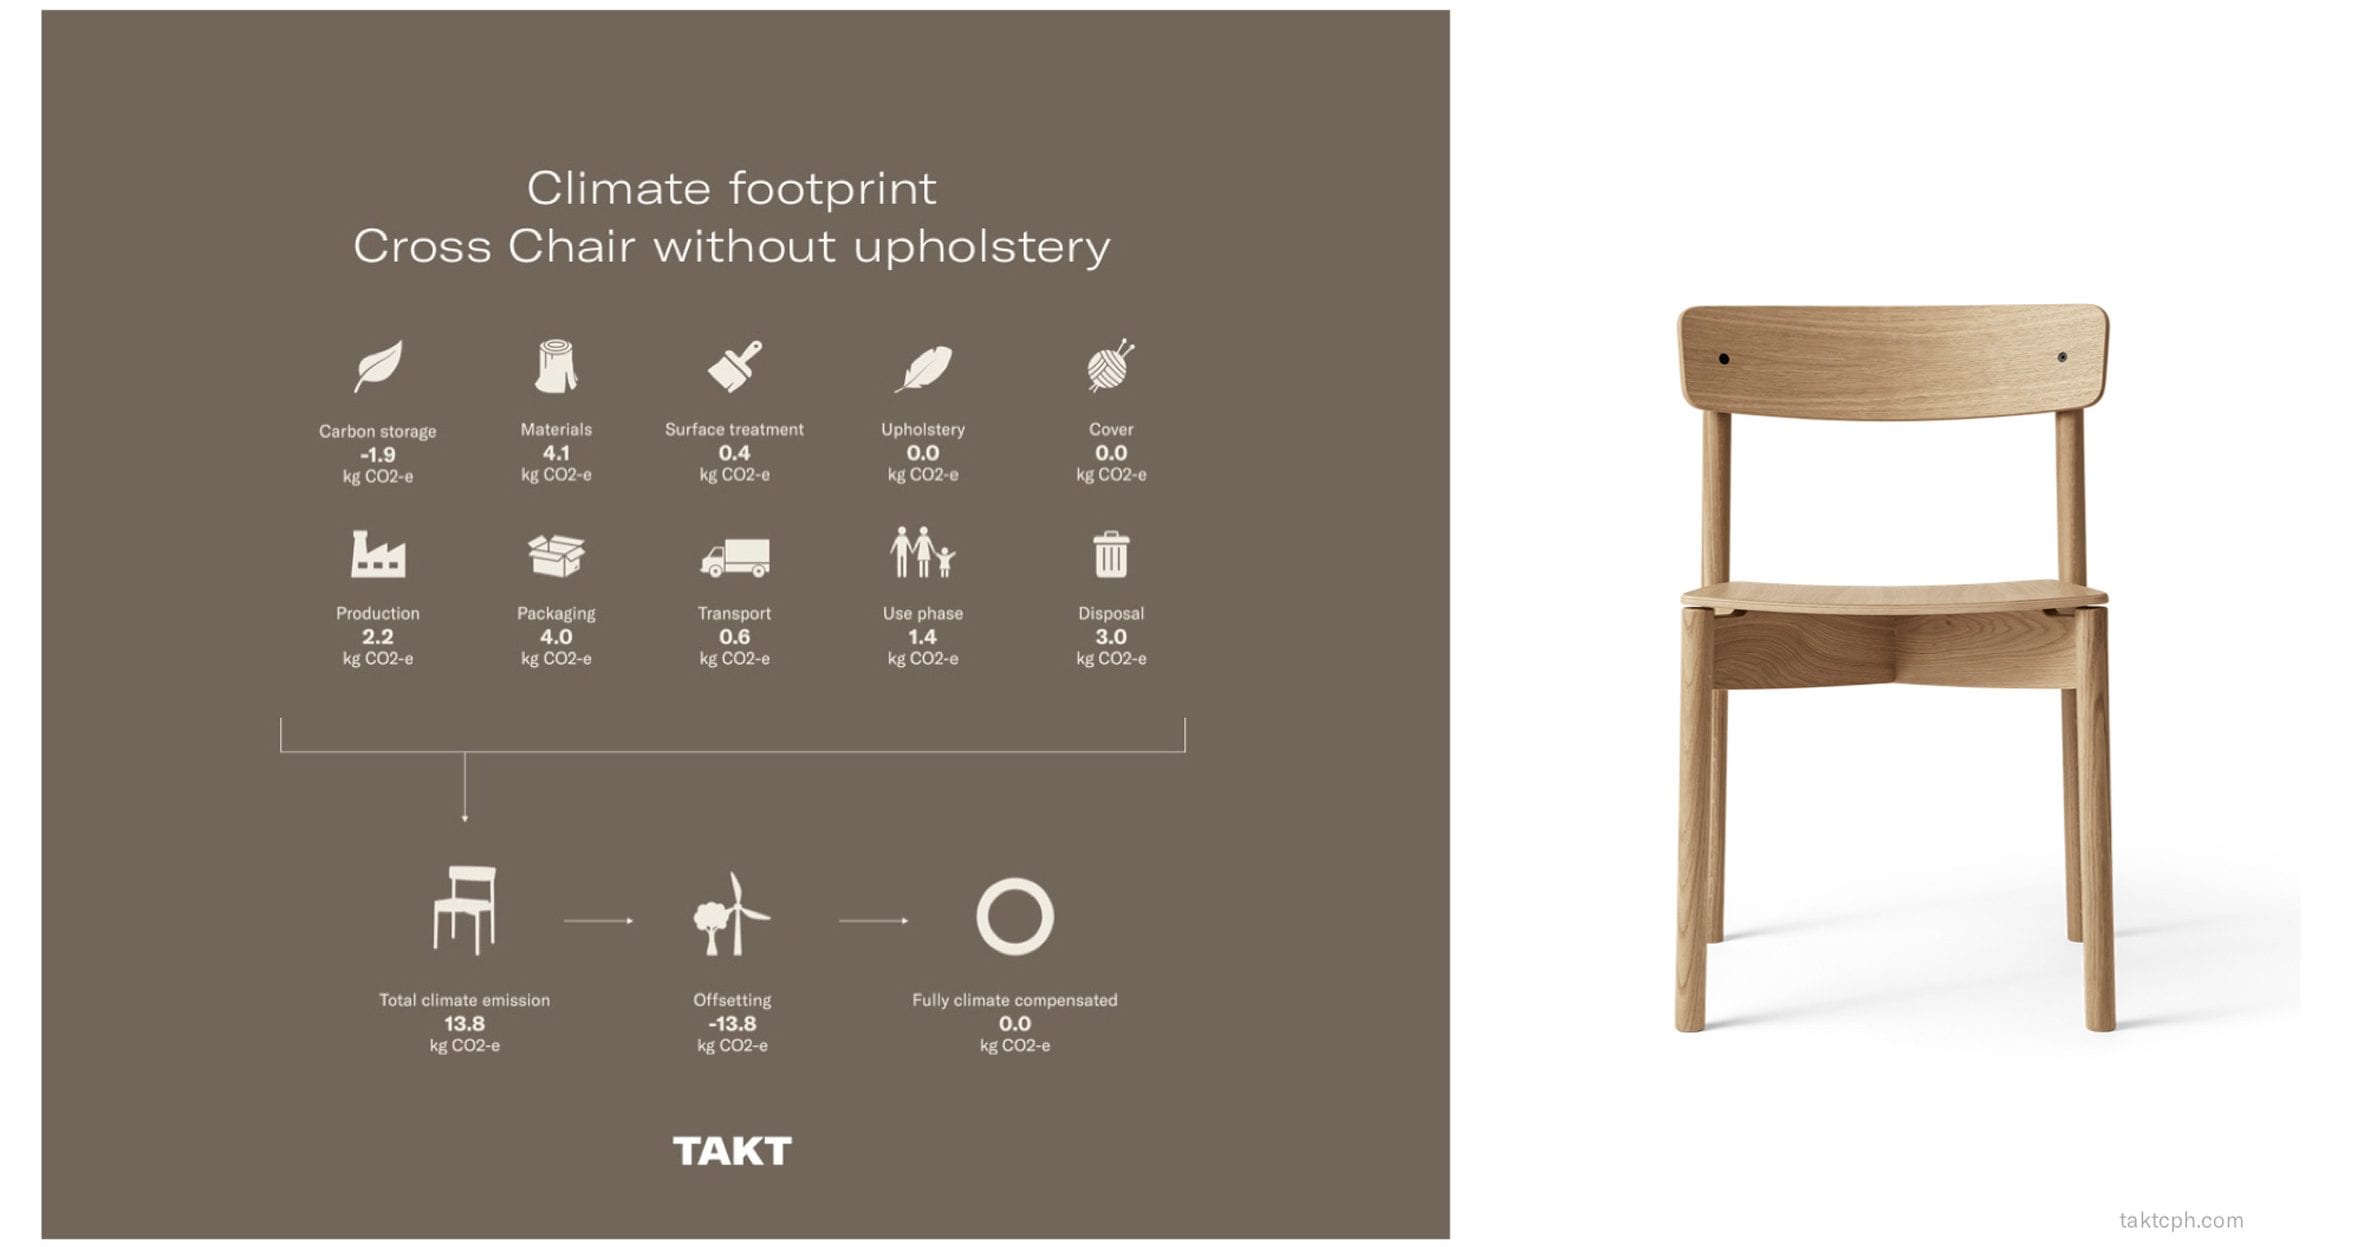 Lifetime emissions of the Cross Chair by Takt